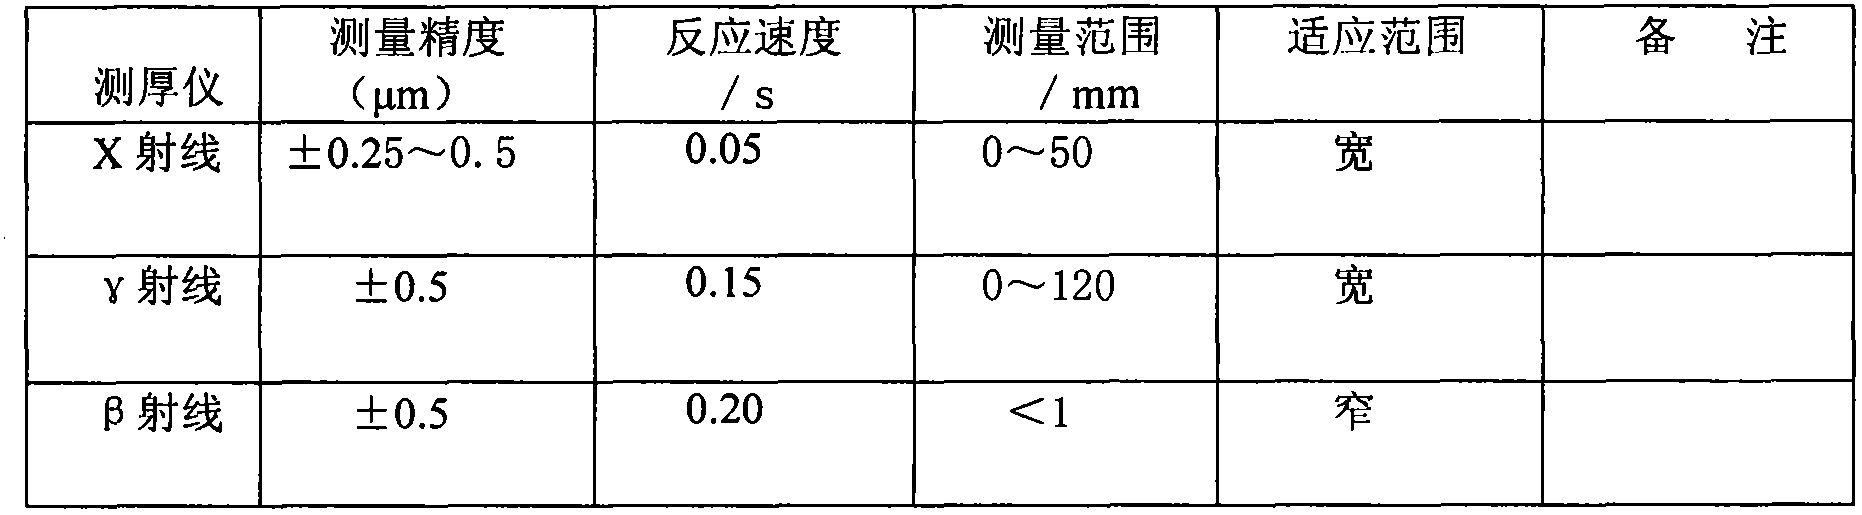 Thickness measuring method for cold rolling strips